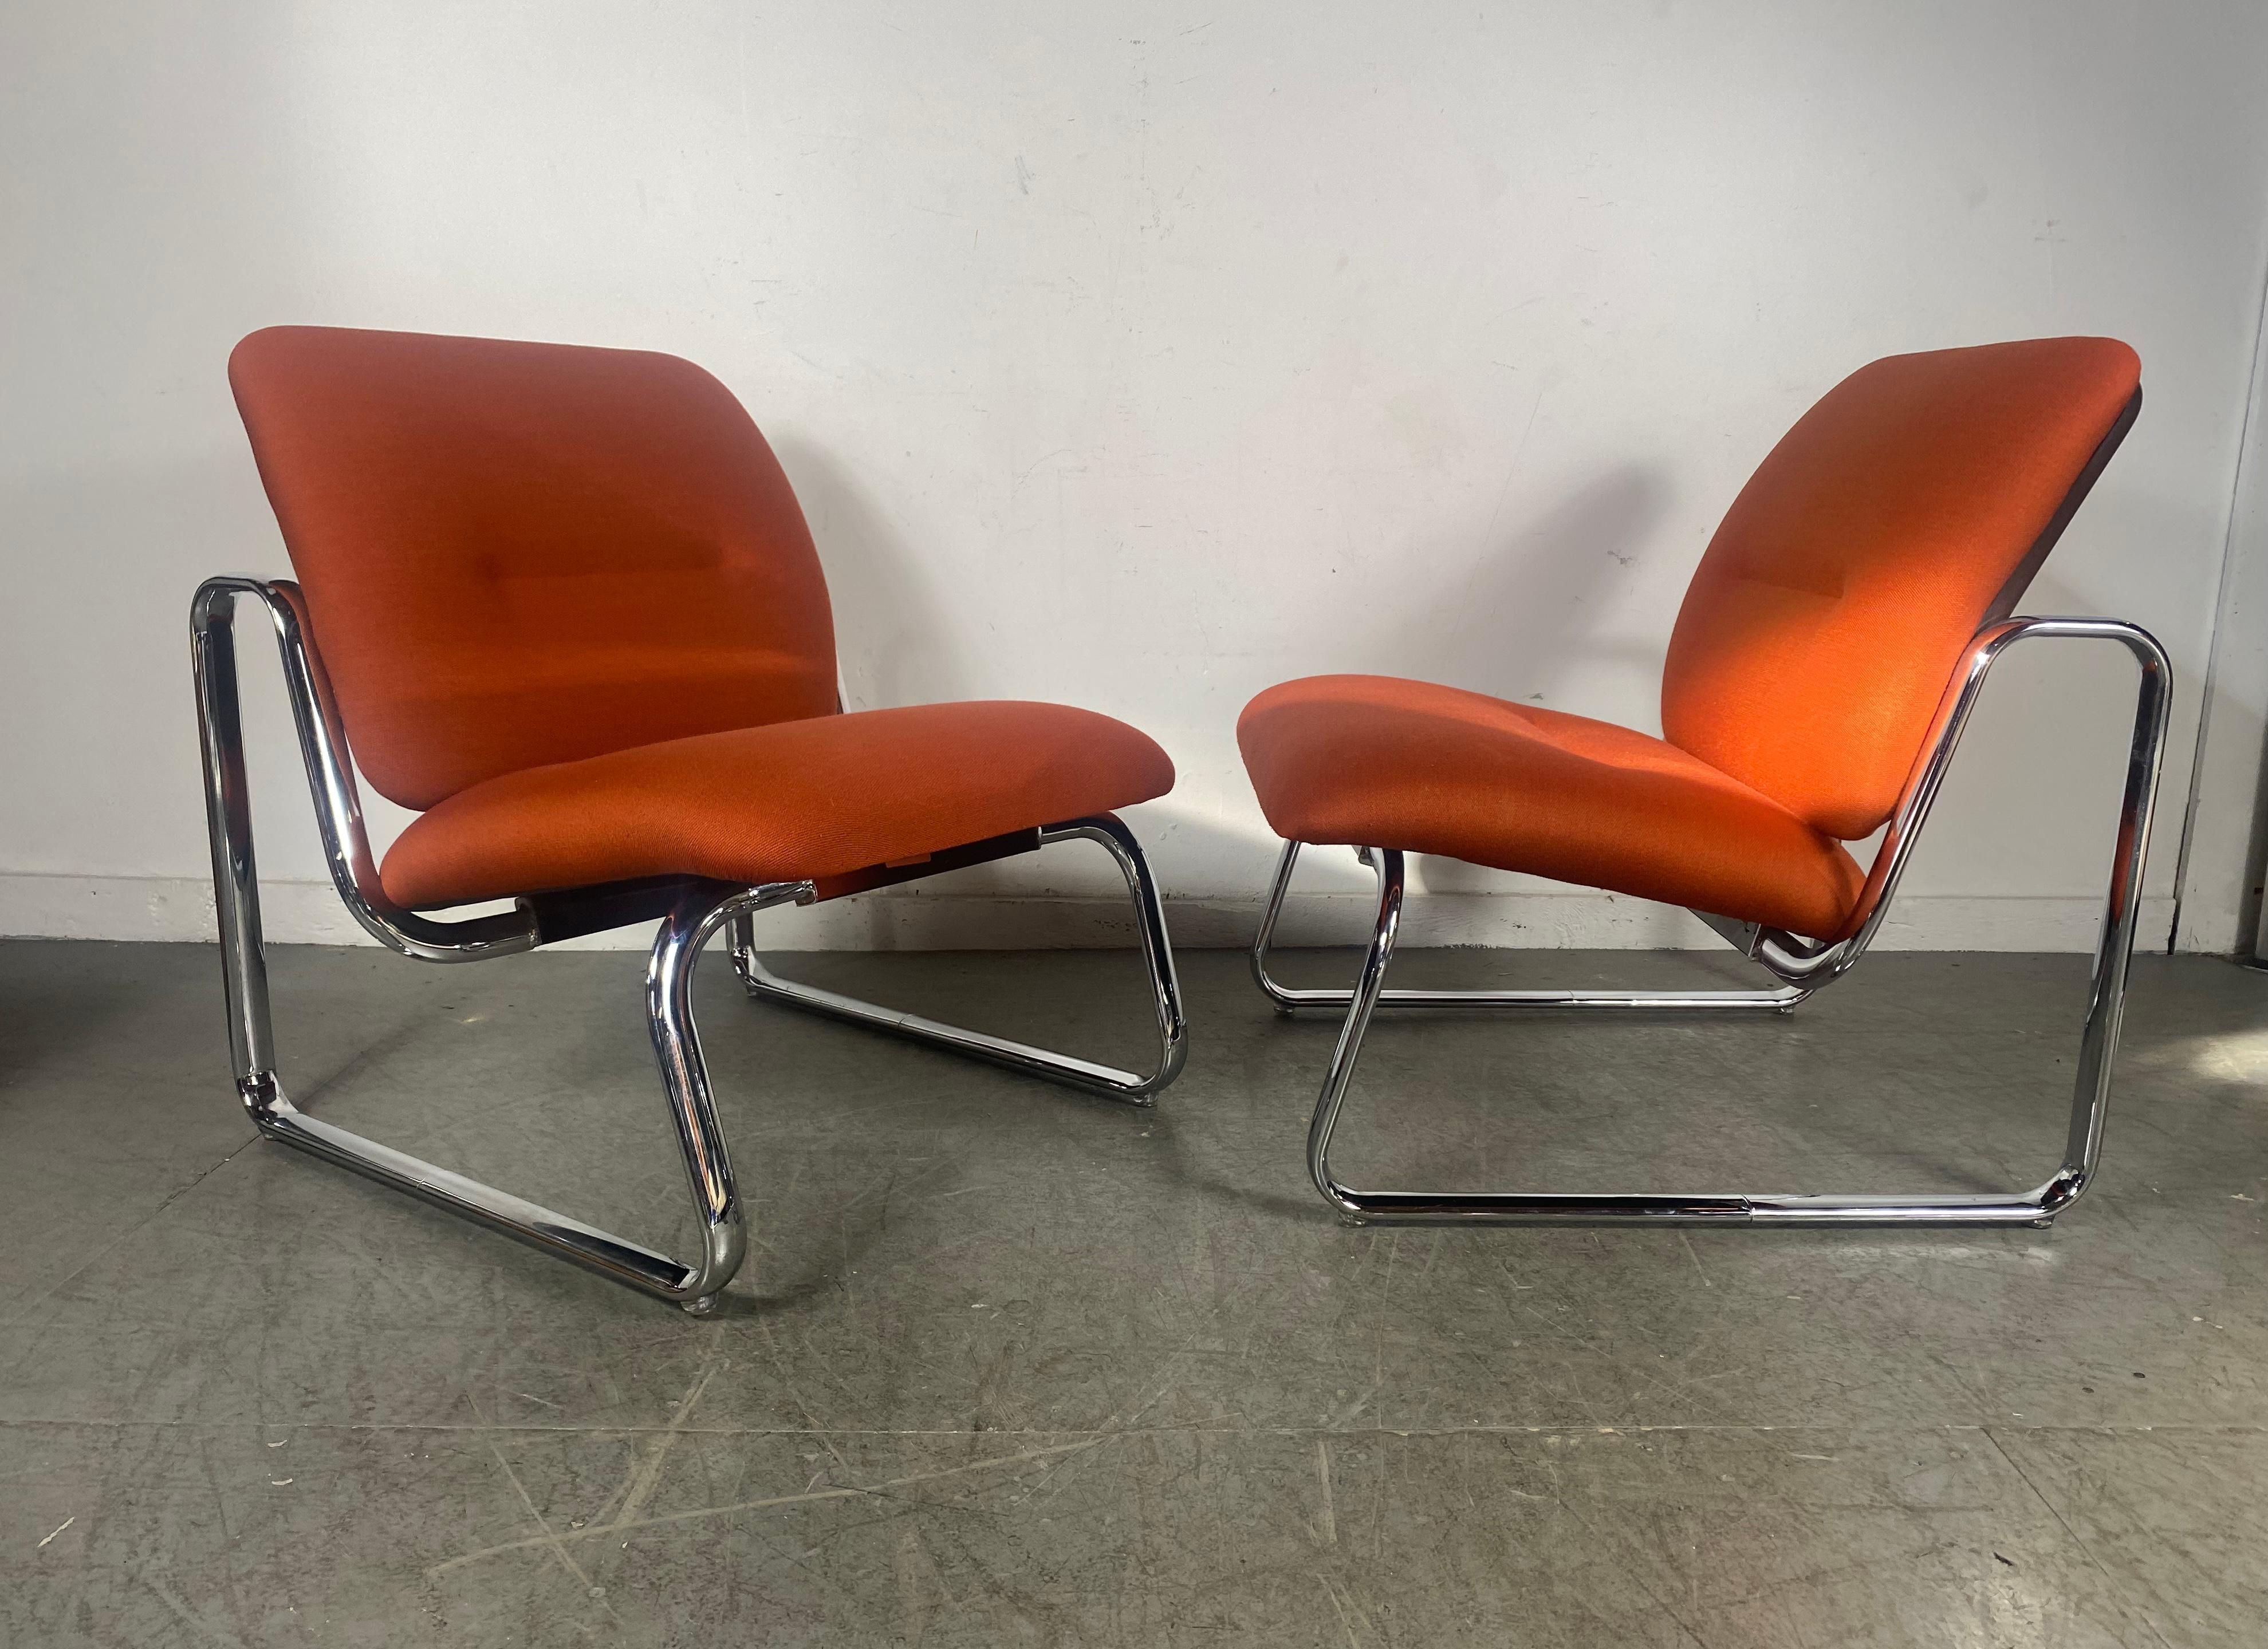 Matched Pair Space Age Modernist Lounge Chairs, Peter Protzmann/ Herman Miller In Good Condition For Sale In Buffalo, NY